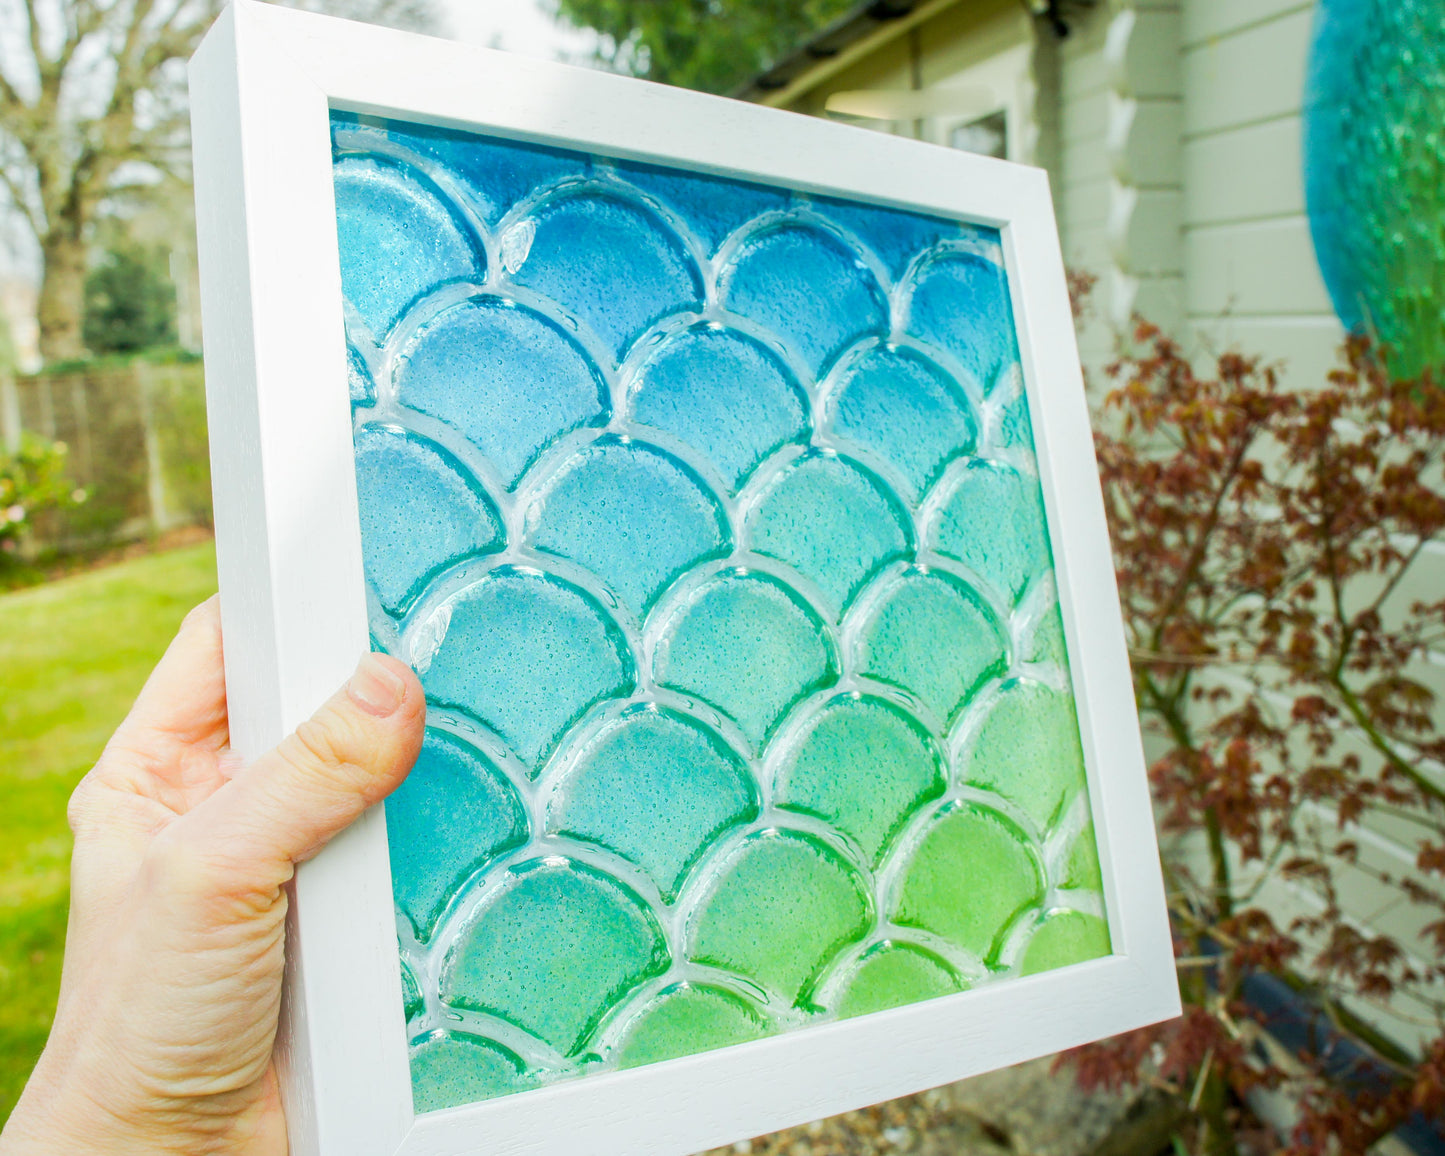 Fish Scale Glass Art 25x25cm (10"x10") - Turquoise Blue Lime Green Fish Scale Glass Framed Picture - Coastal Wall Art